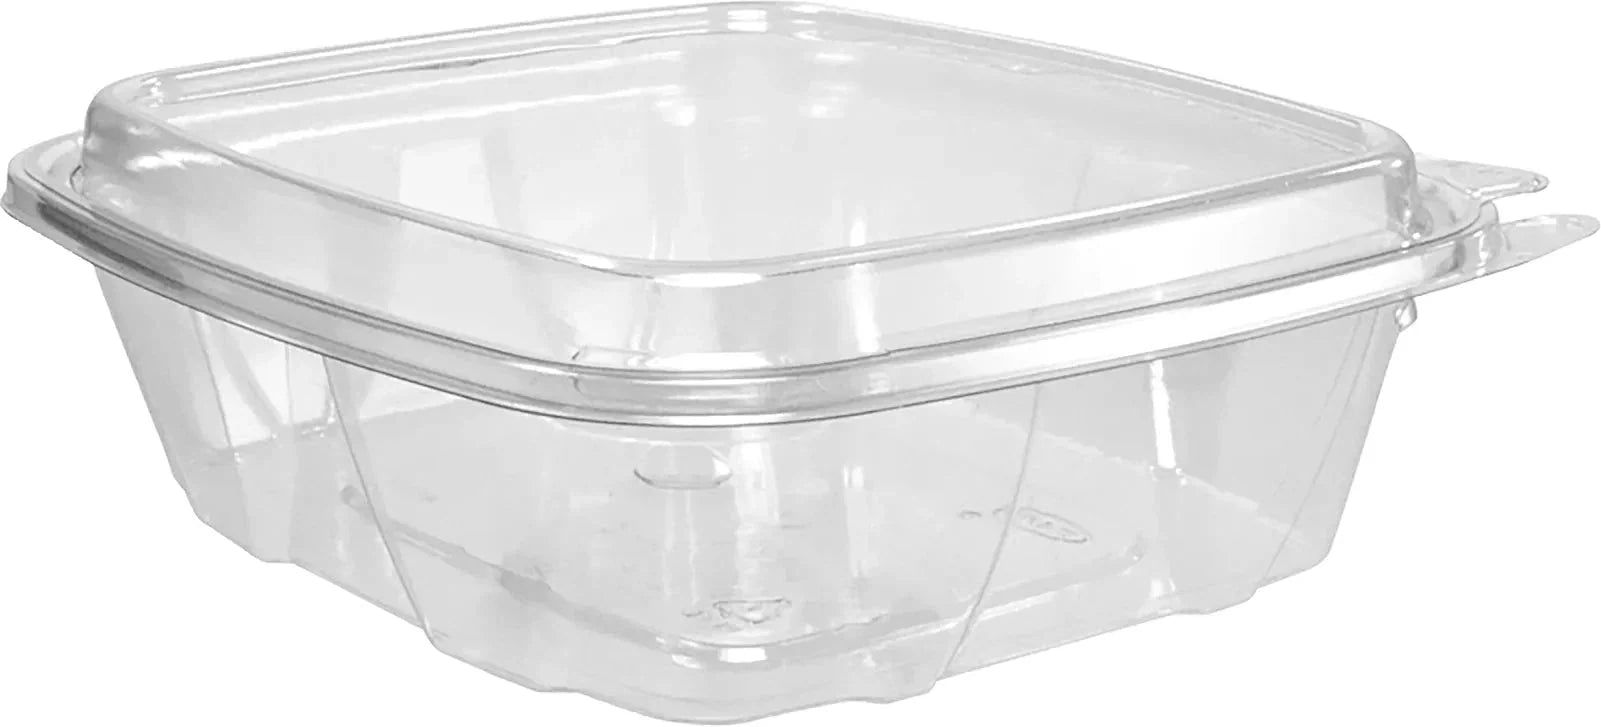 Dart Container - 24 Oz PET Plastic Tamper-Evident/Resistant Container With Clear Dome Lid, 200/Cs - CH24DED